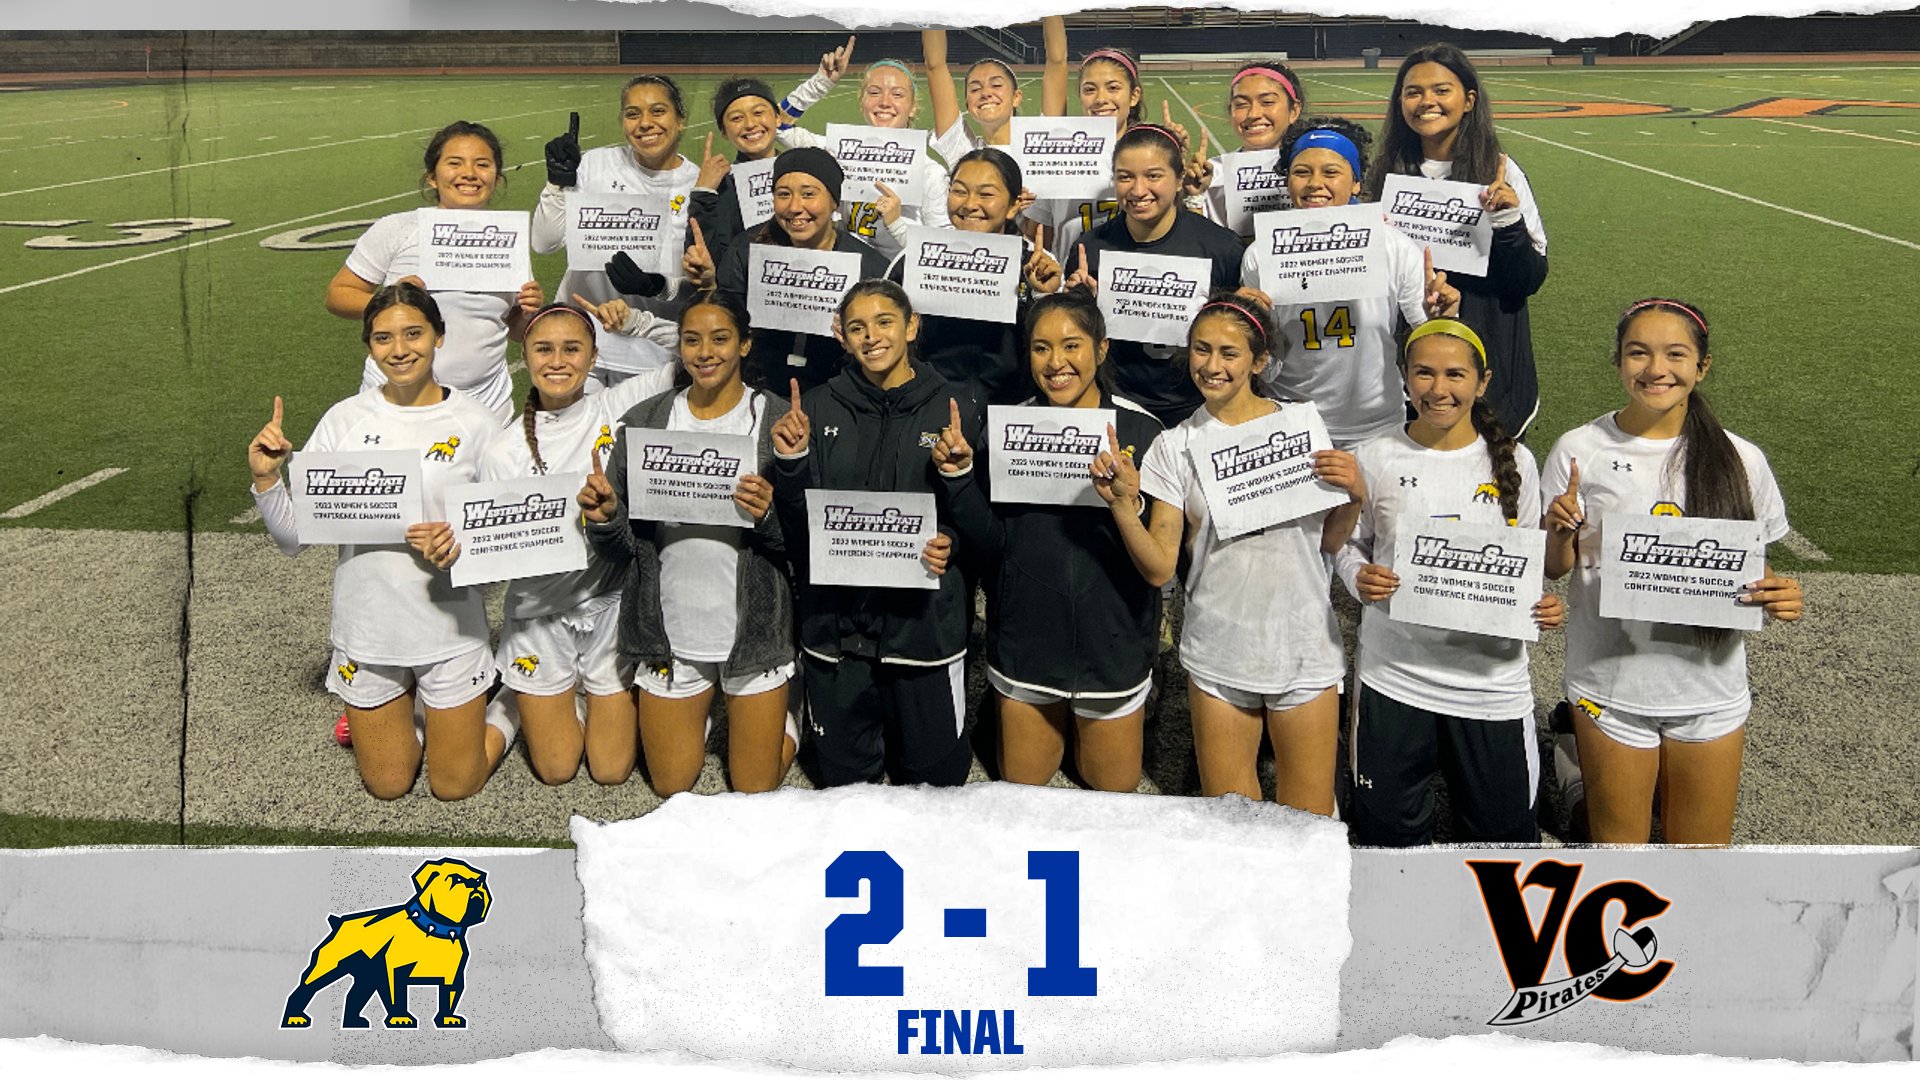 HISTORY MADE: Women's Soccer Claims First WSC Title in Program History with 2-1 Win at Ventura